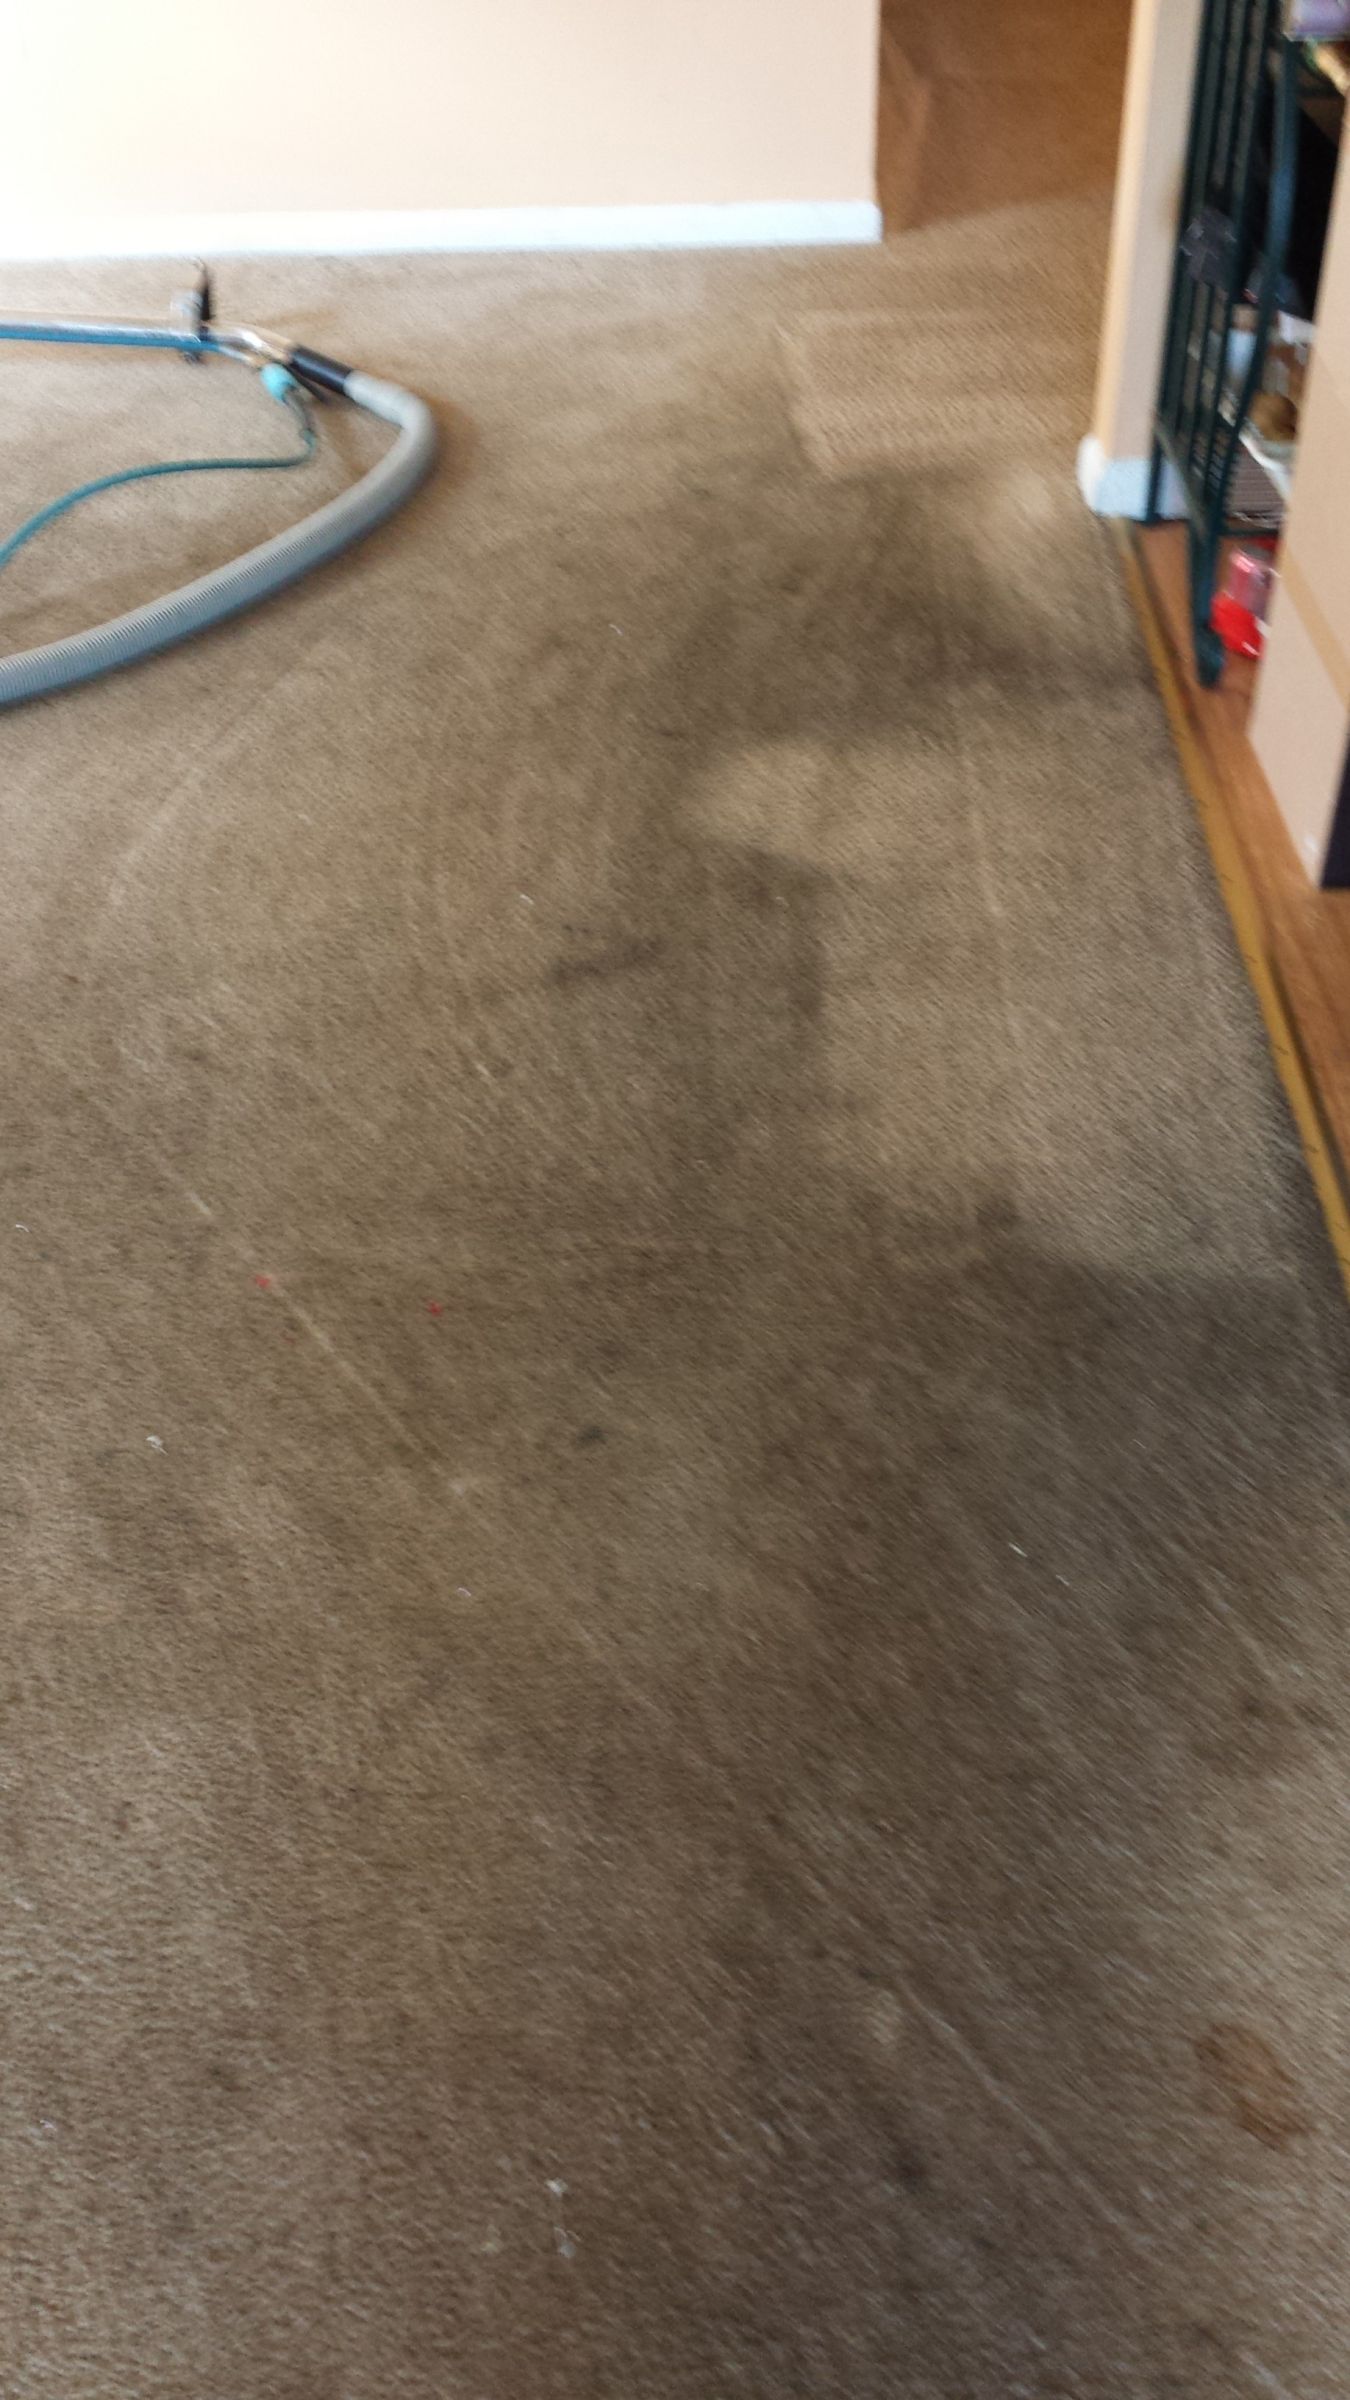 Cherry Hill Carpet Cleaning. Signs You Need Expert Help